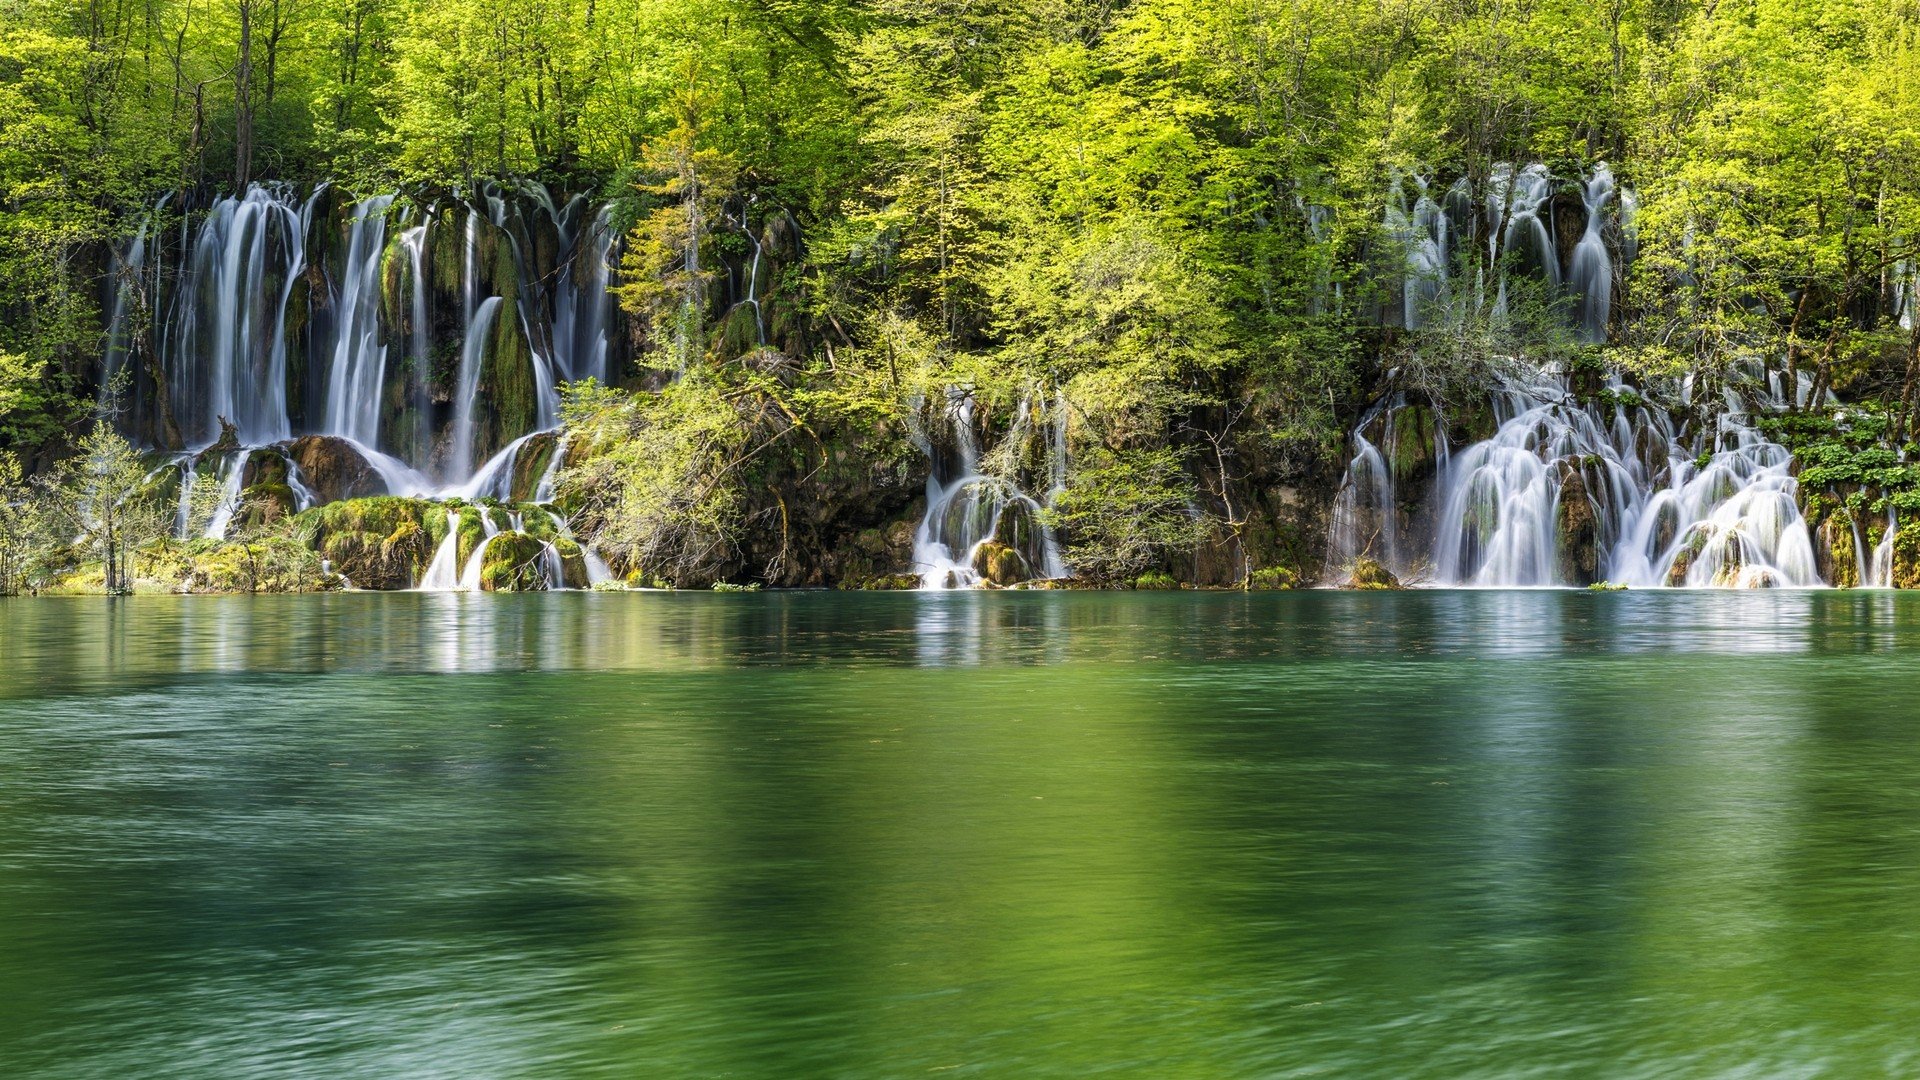 green, Water, Landscapes, Nature, Trees, White, Forests, Wonder, Lakes, Waterfalls, Rivers, Lagoon Wallpaper